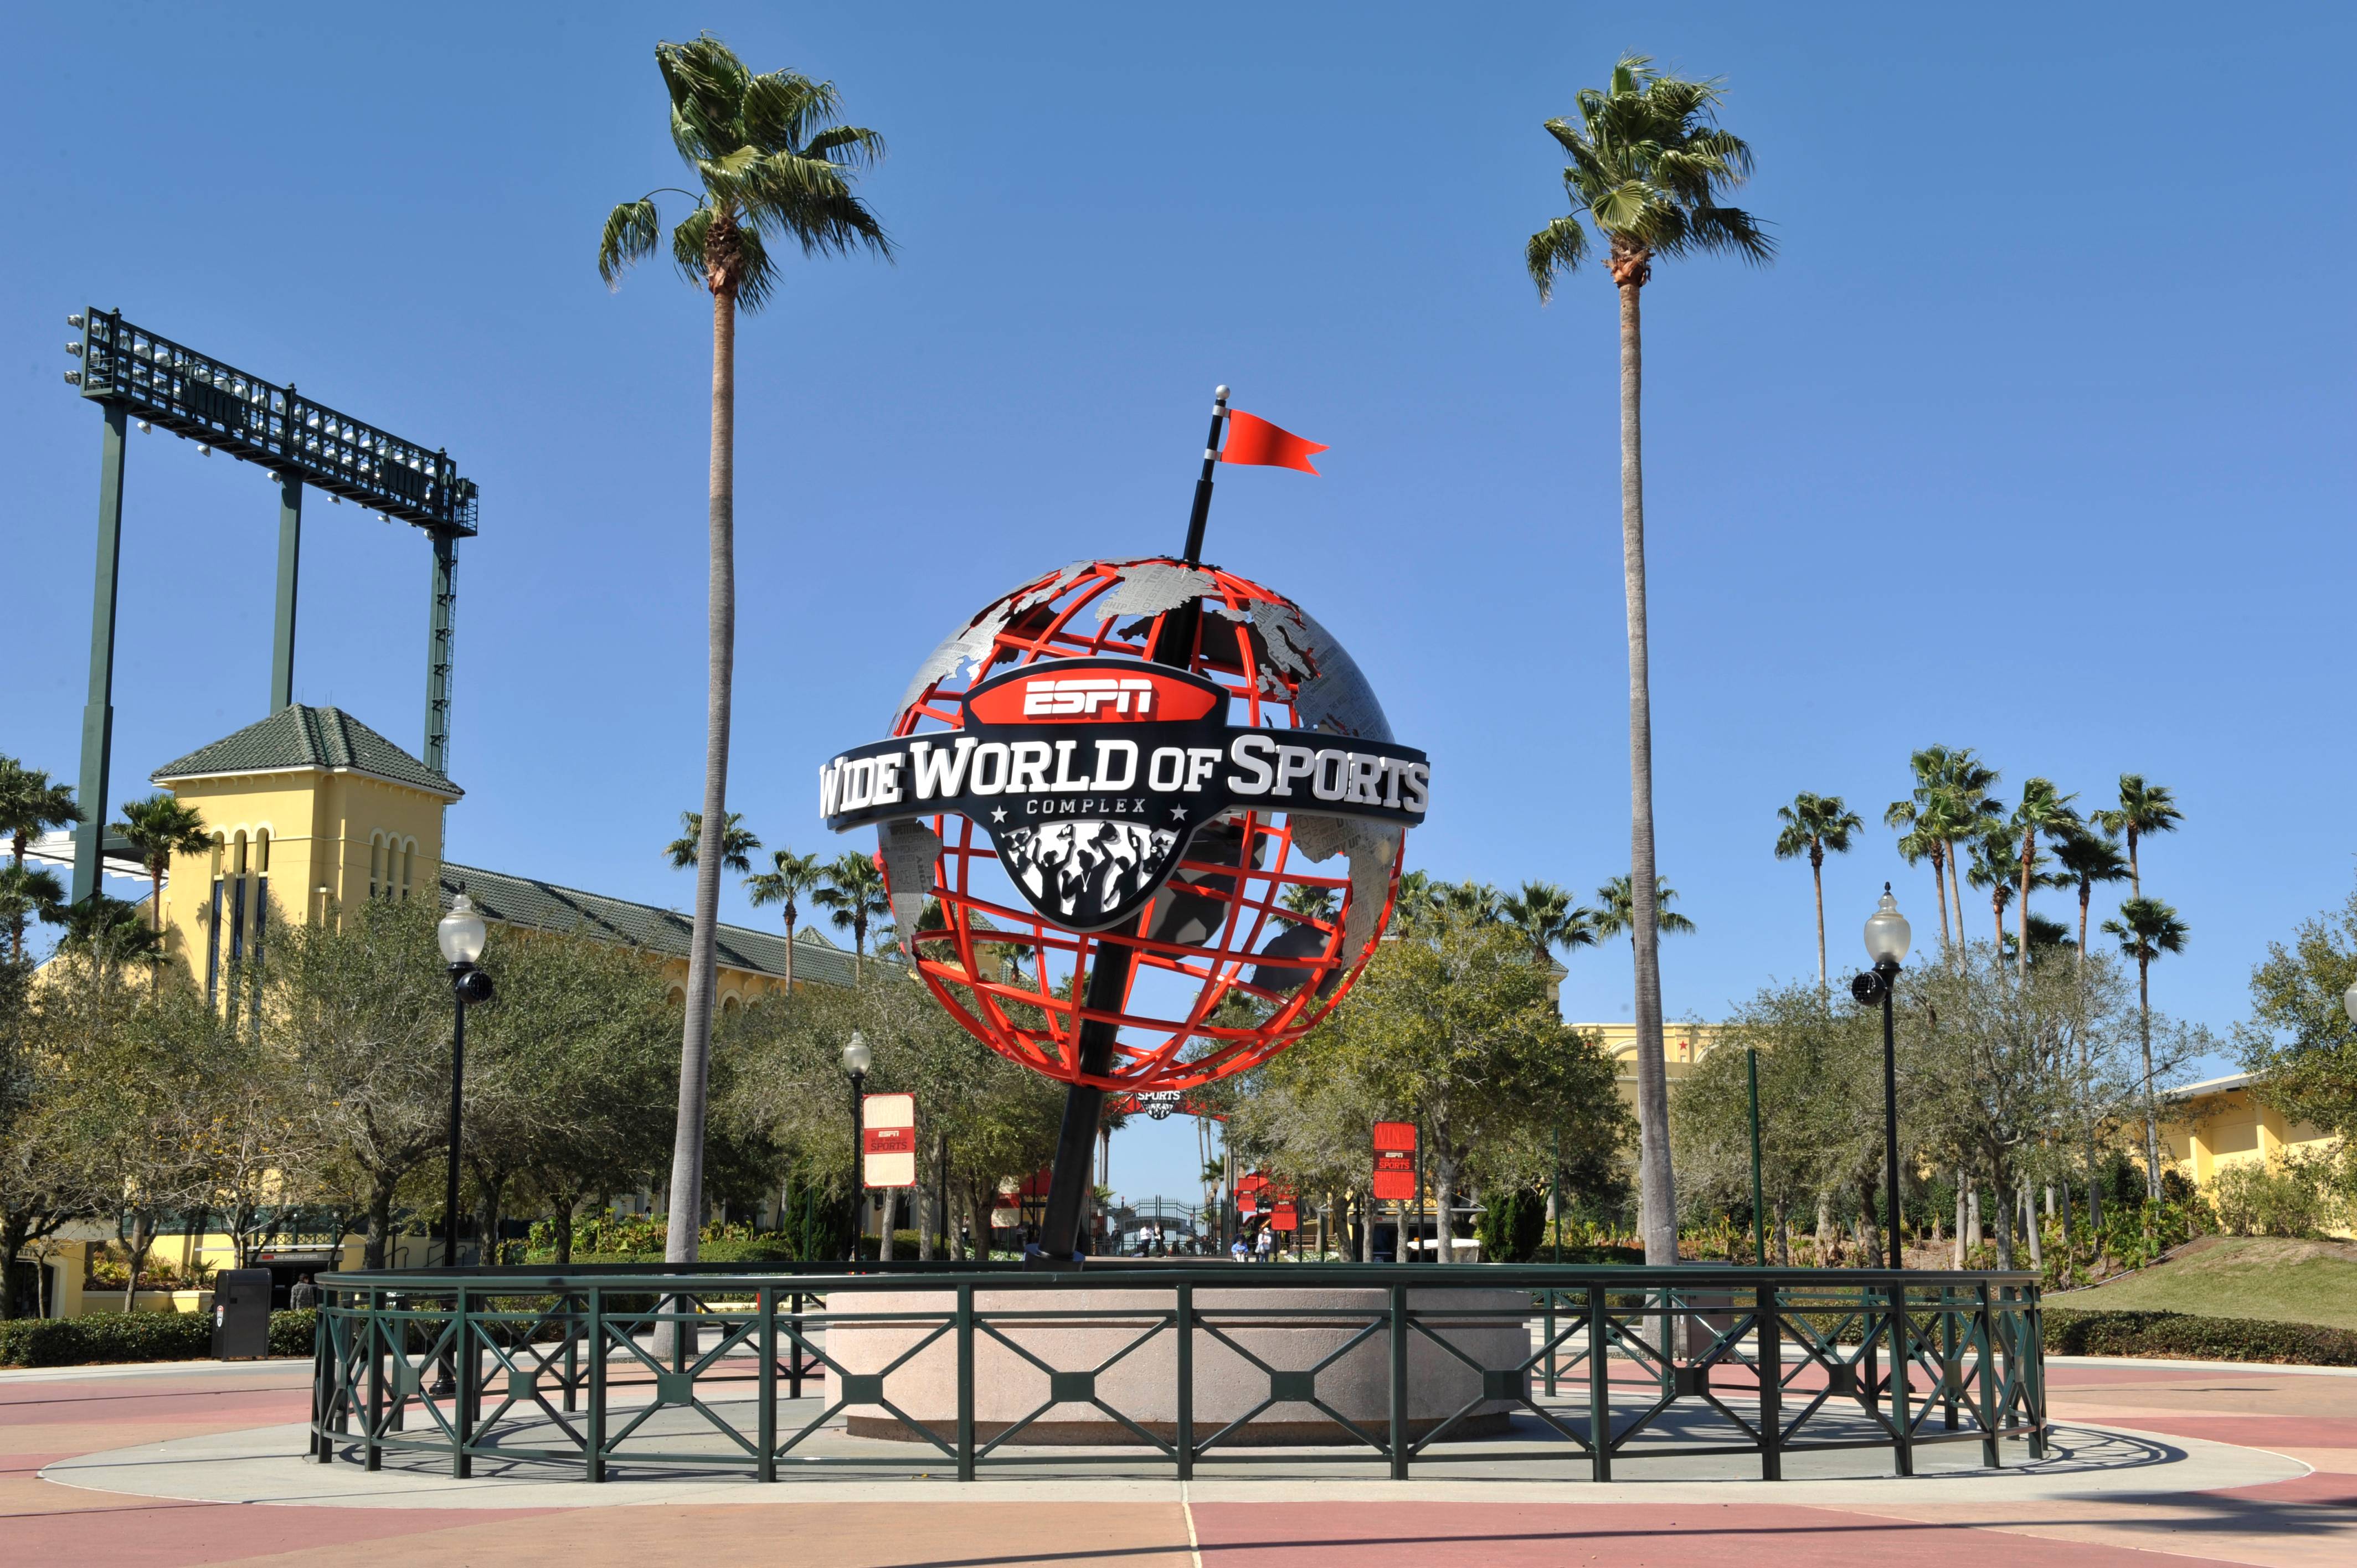 Walt Disney World Resort is the first stop on the 'American Idol' nationwide bus tour auditions